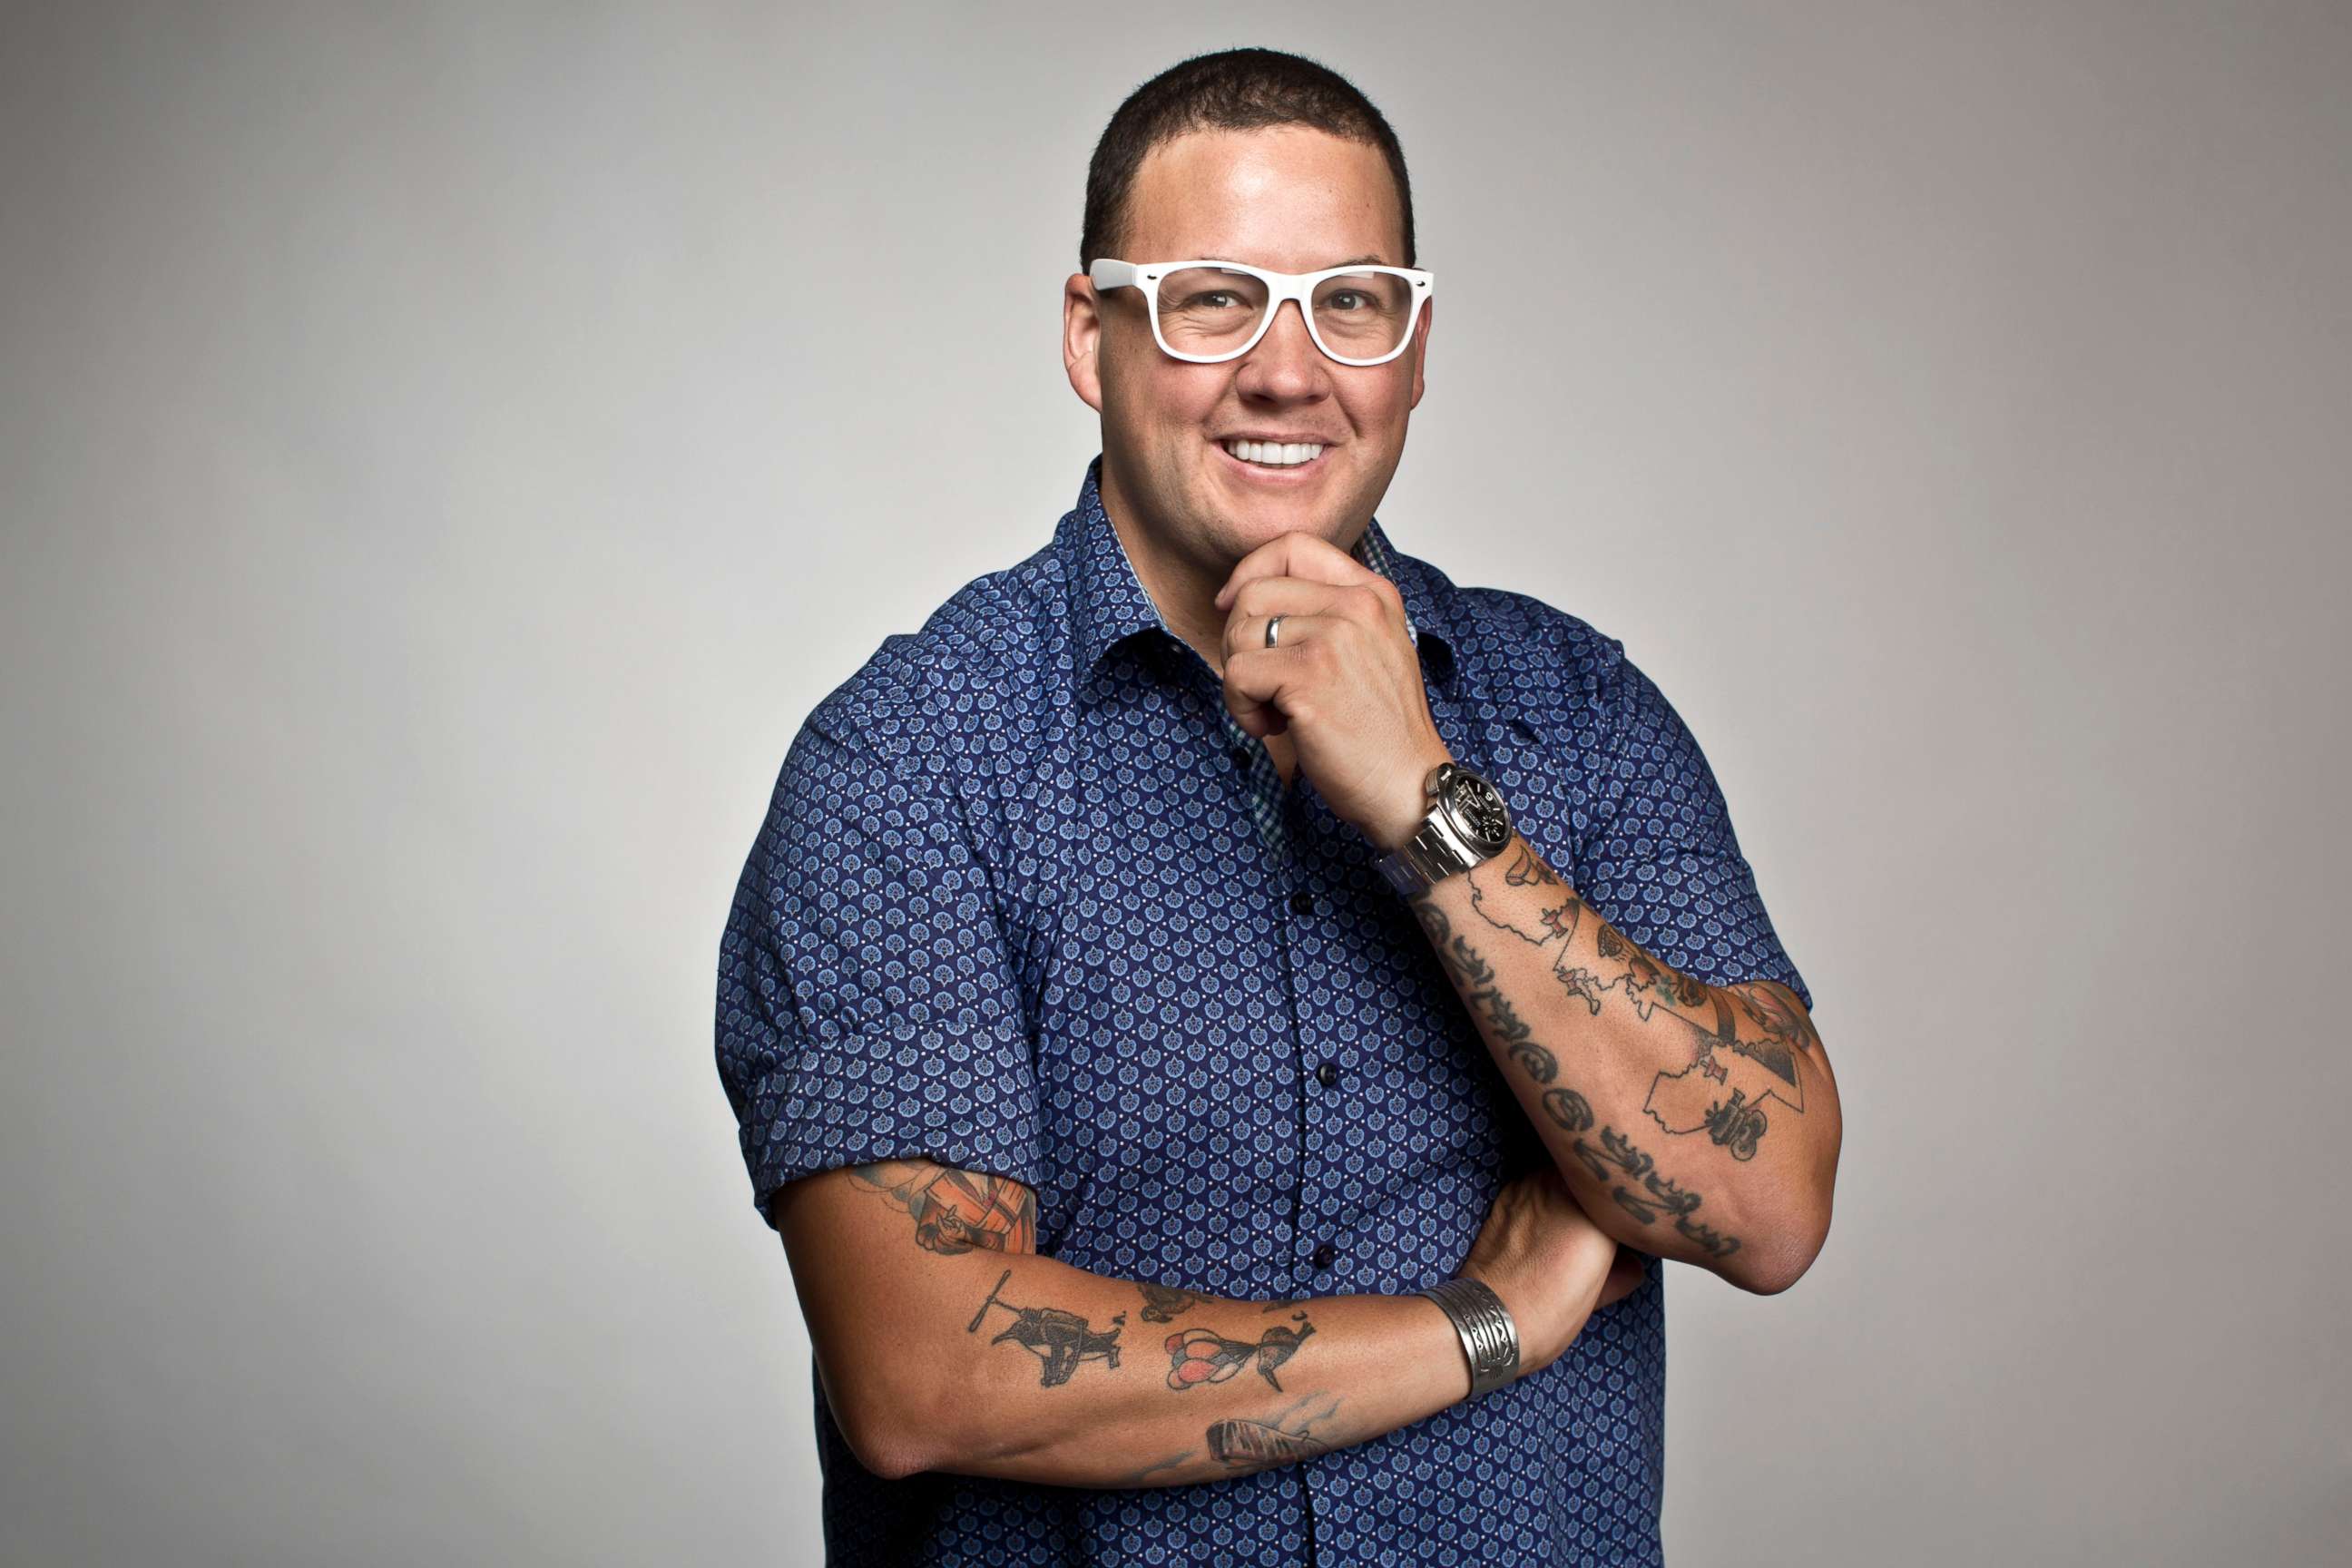 PHOTO: Celebrity chef Graham Elliot photographed at The Toronto Star in this July 12, 2016 file photo.        